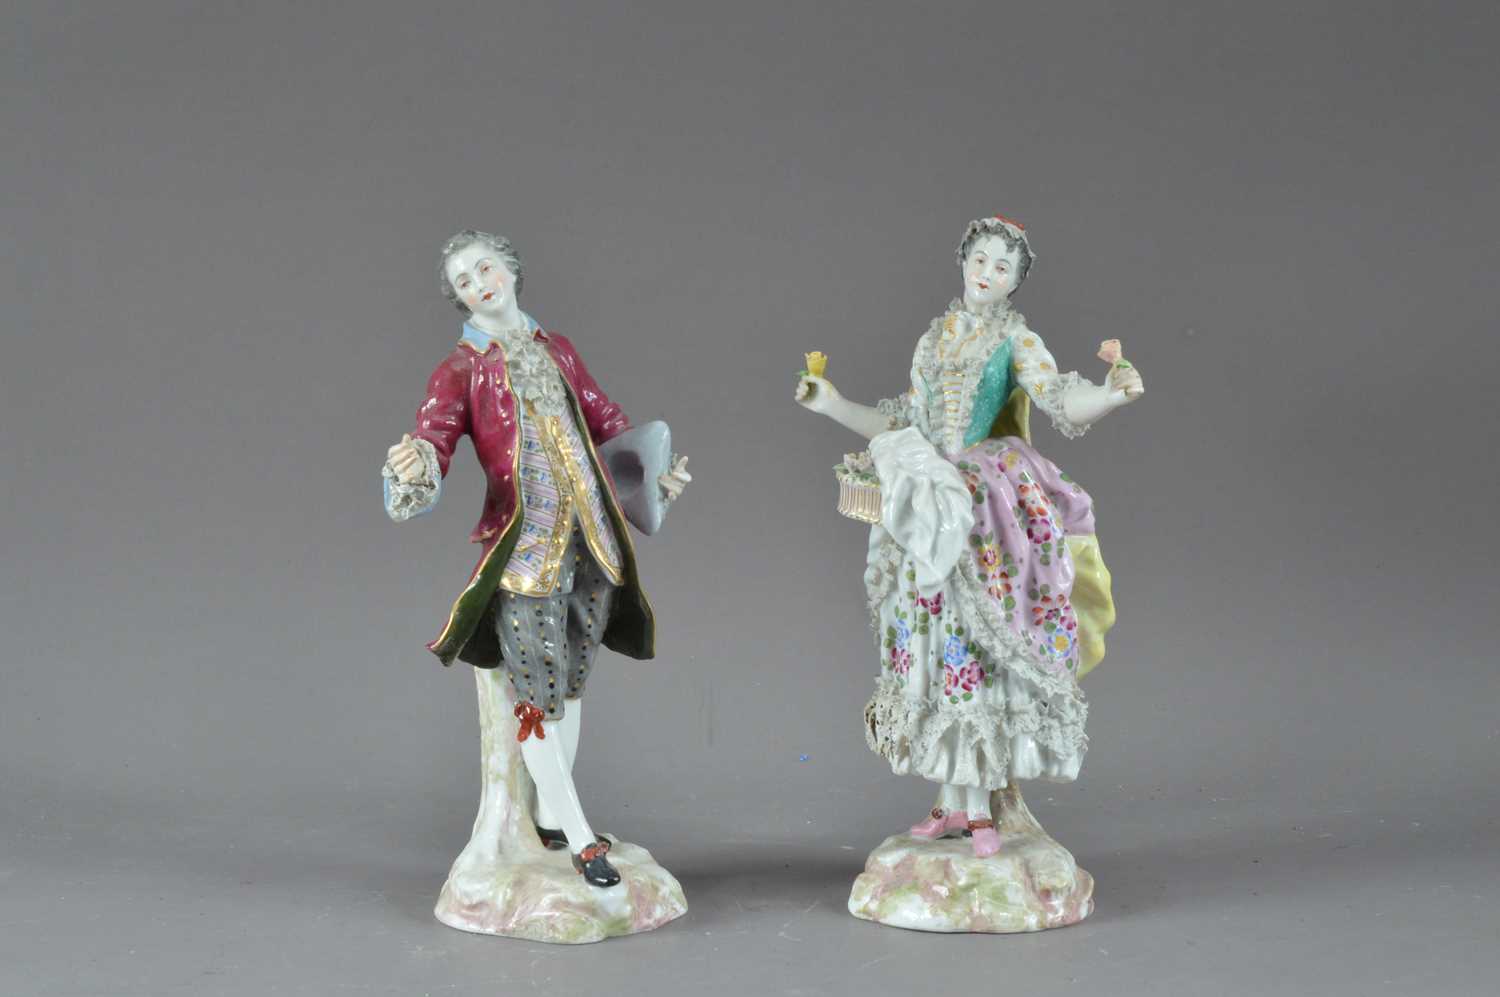 Lot 283 - A pair of early 20th century Meissen porcelain figurines